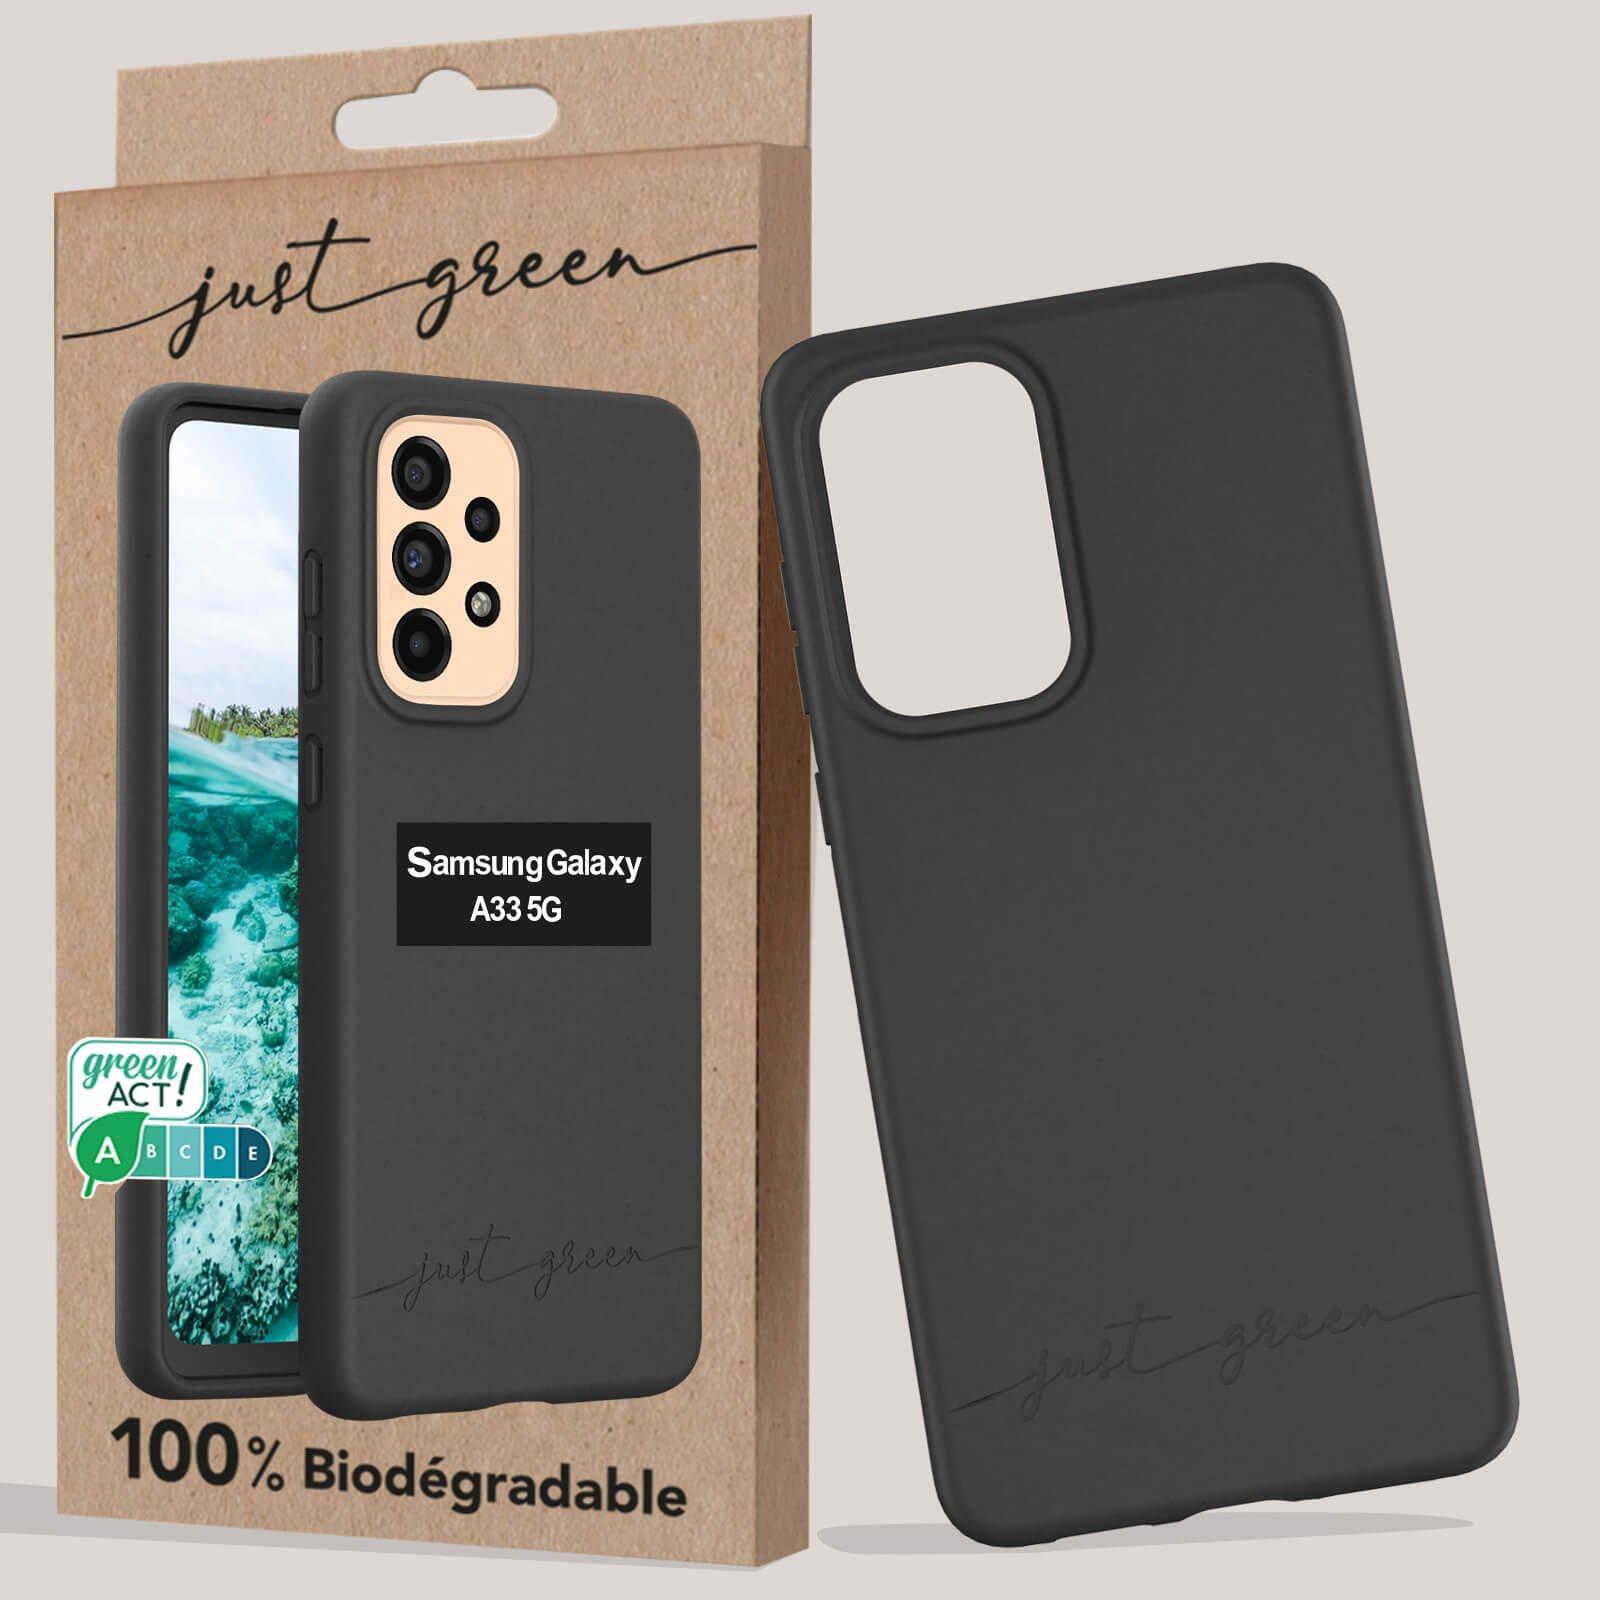 Just green  Coque Samsung A33 Recyclable 